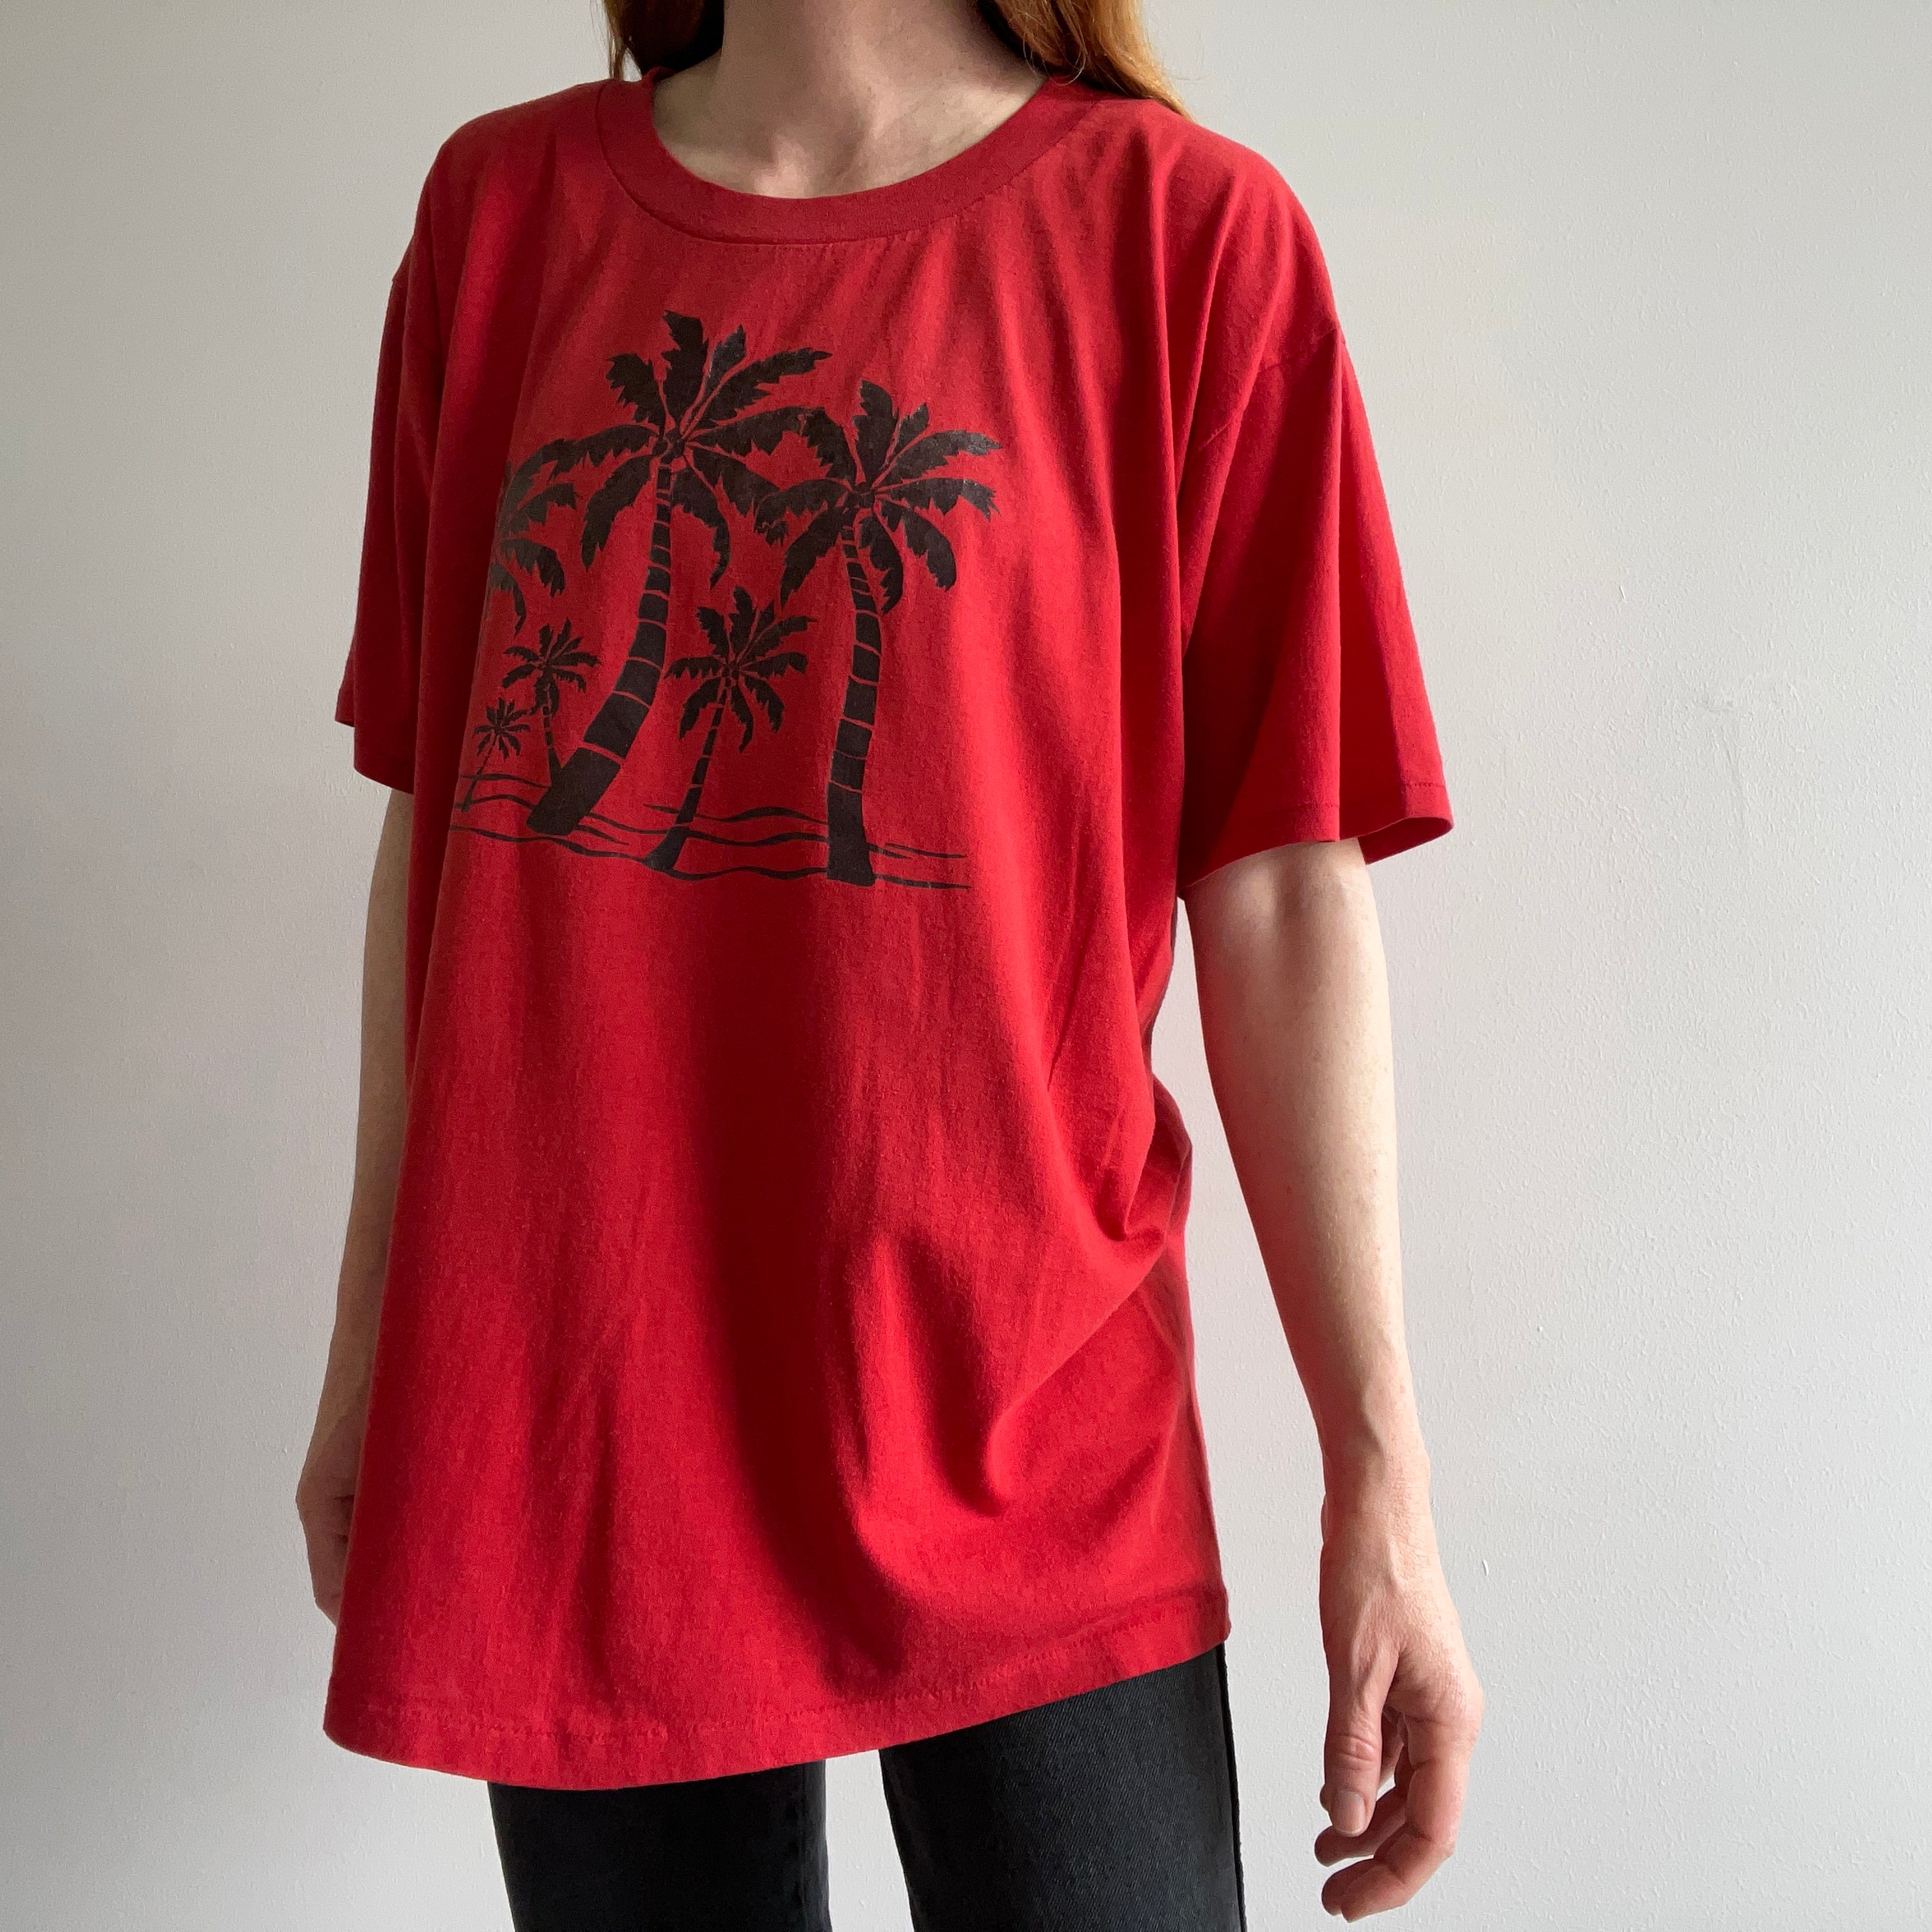 1970/80s Palm Trees on a Red T-Shirt on a Cal Cru